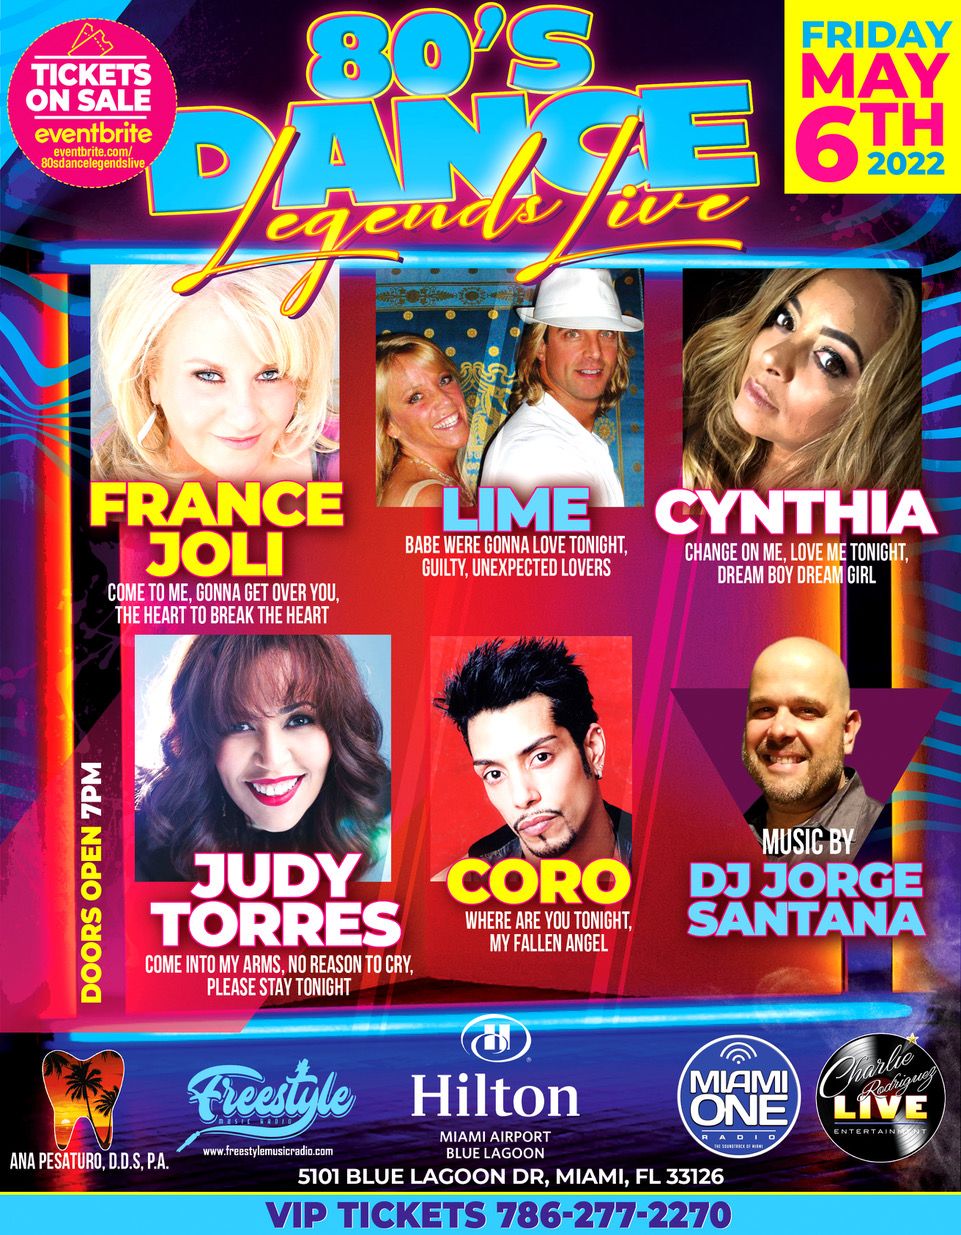 80s DANCE LEGENDS LIVE TICKETS ON SALE AT EVENRBRITE  VIP and Groups -277-2270   MAY 6, 2022 